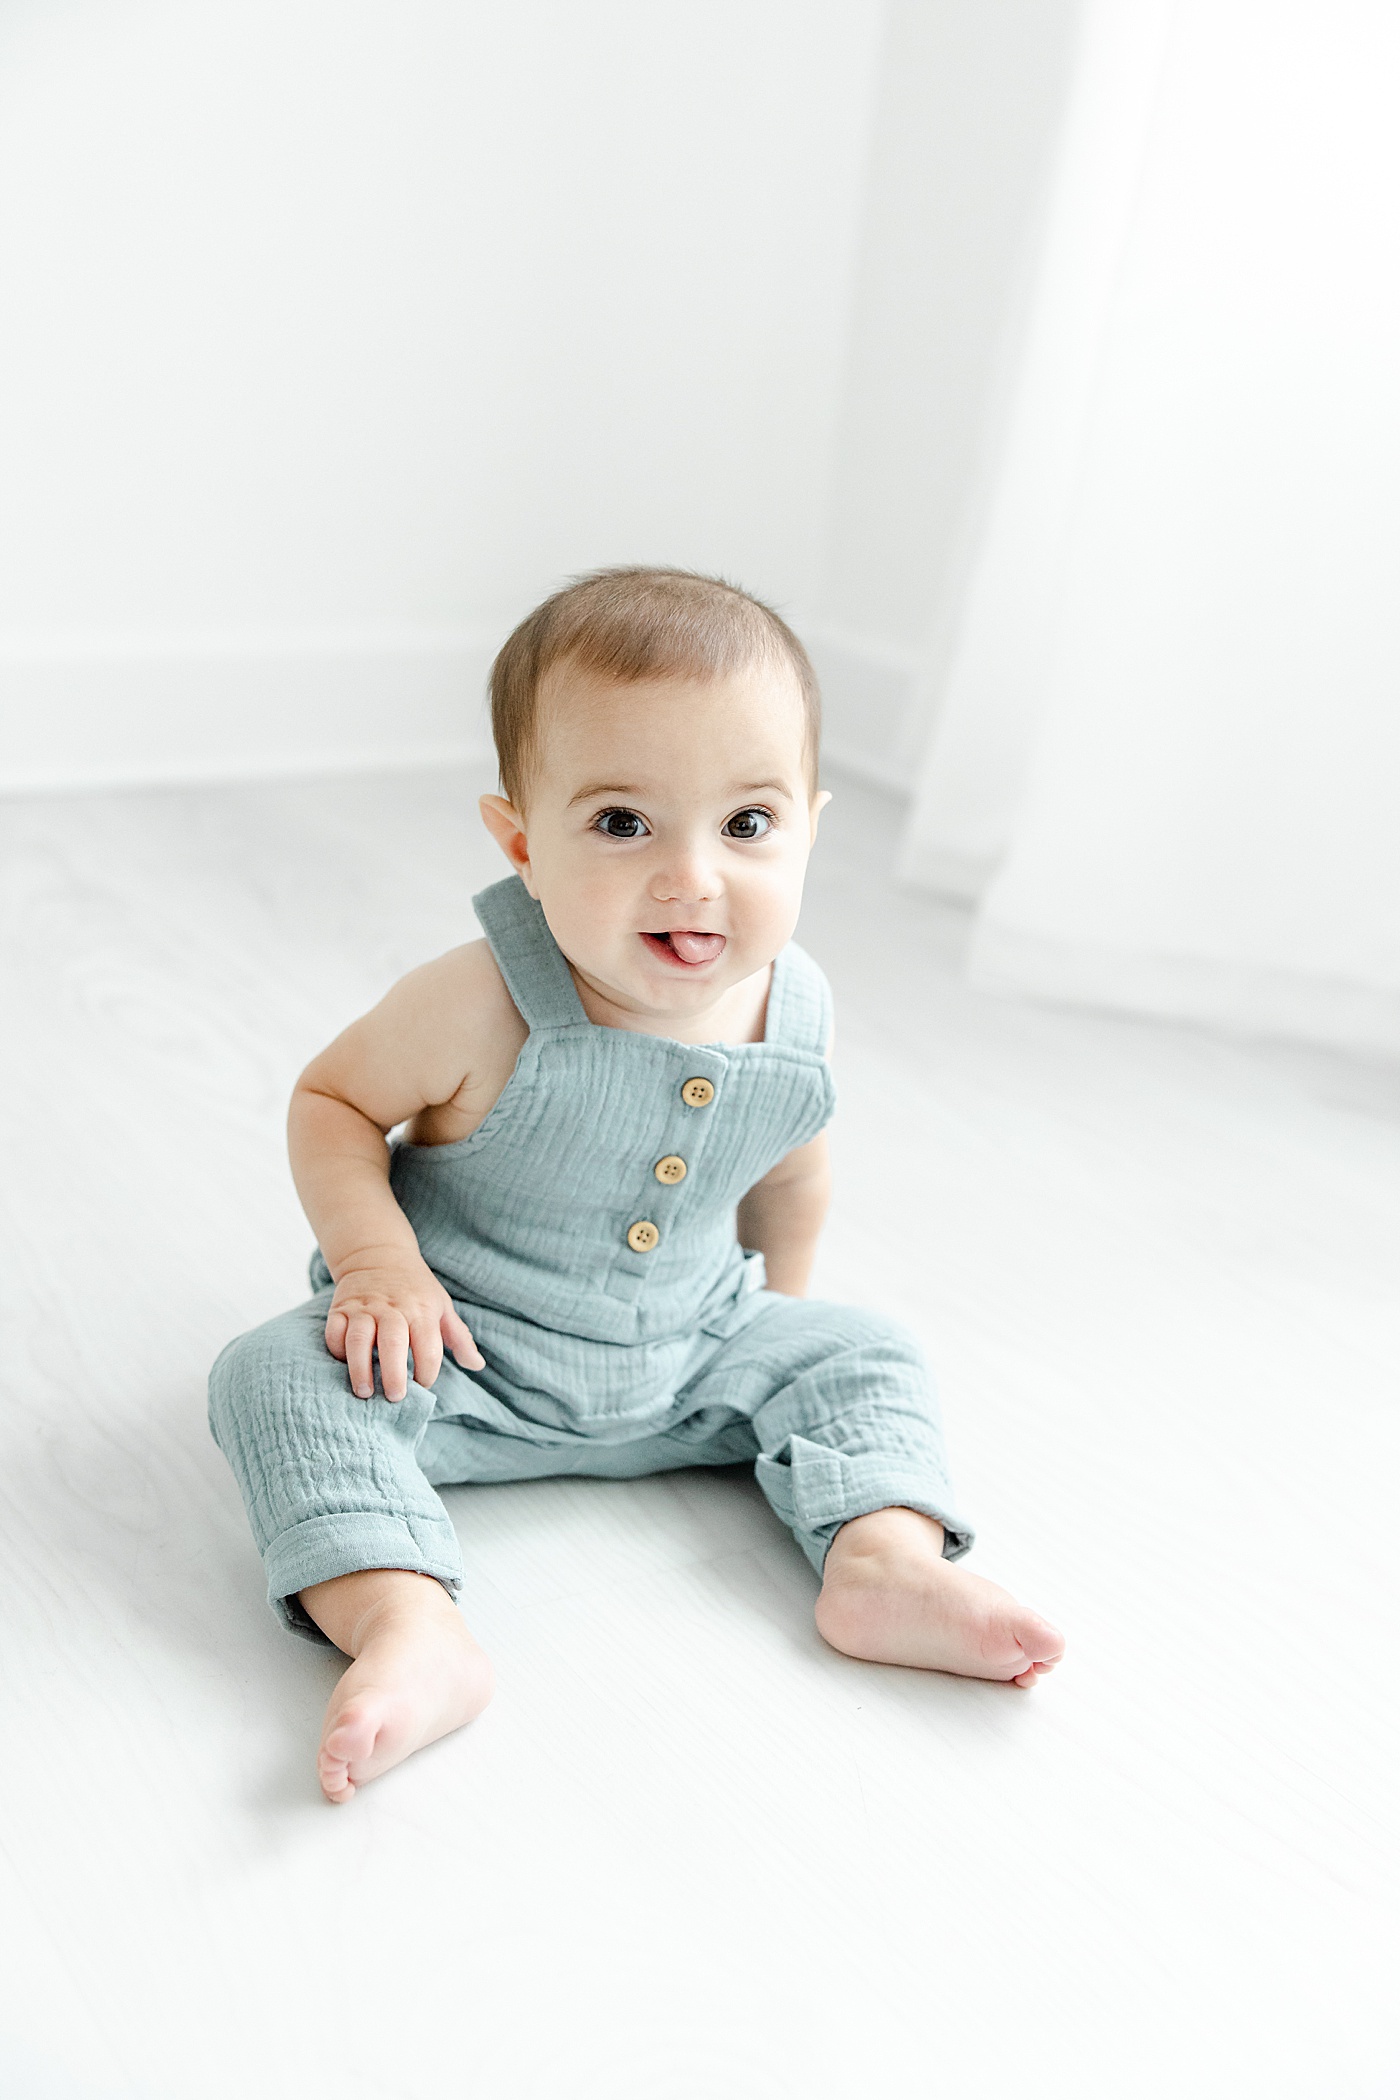 7 month old baby boy sitting for milestone session in studio in Westport, CT | Kristin Wood Photography